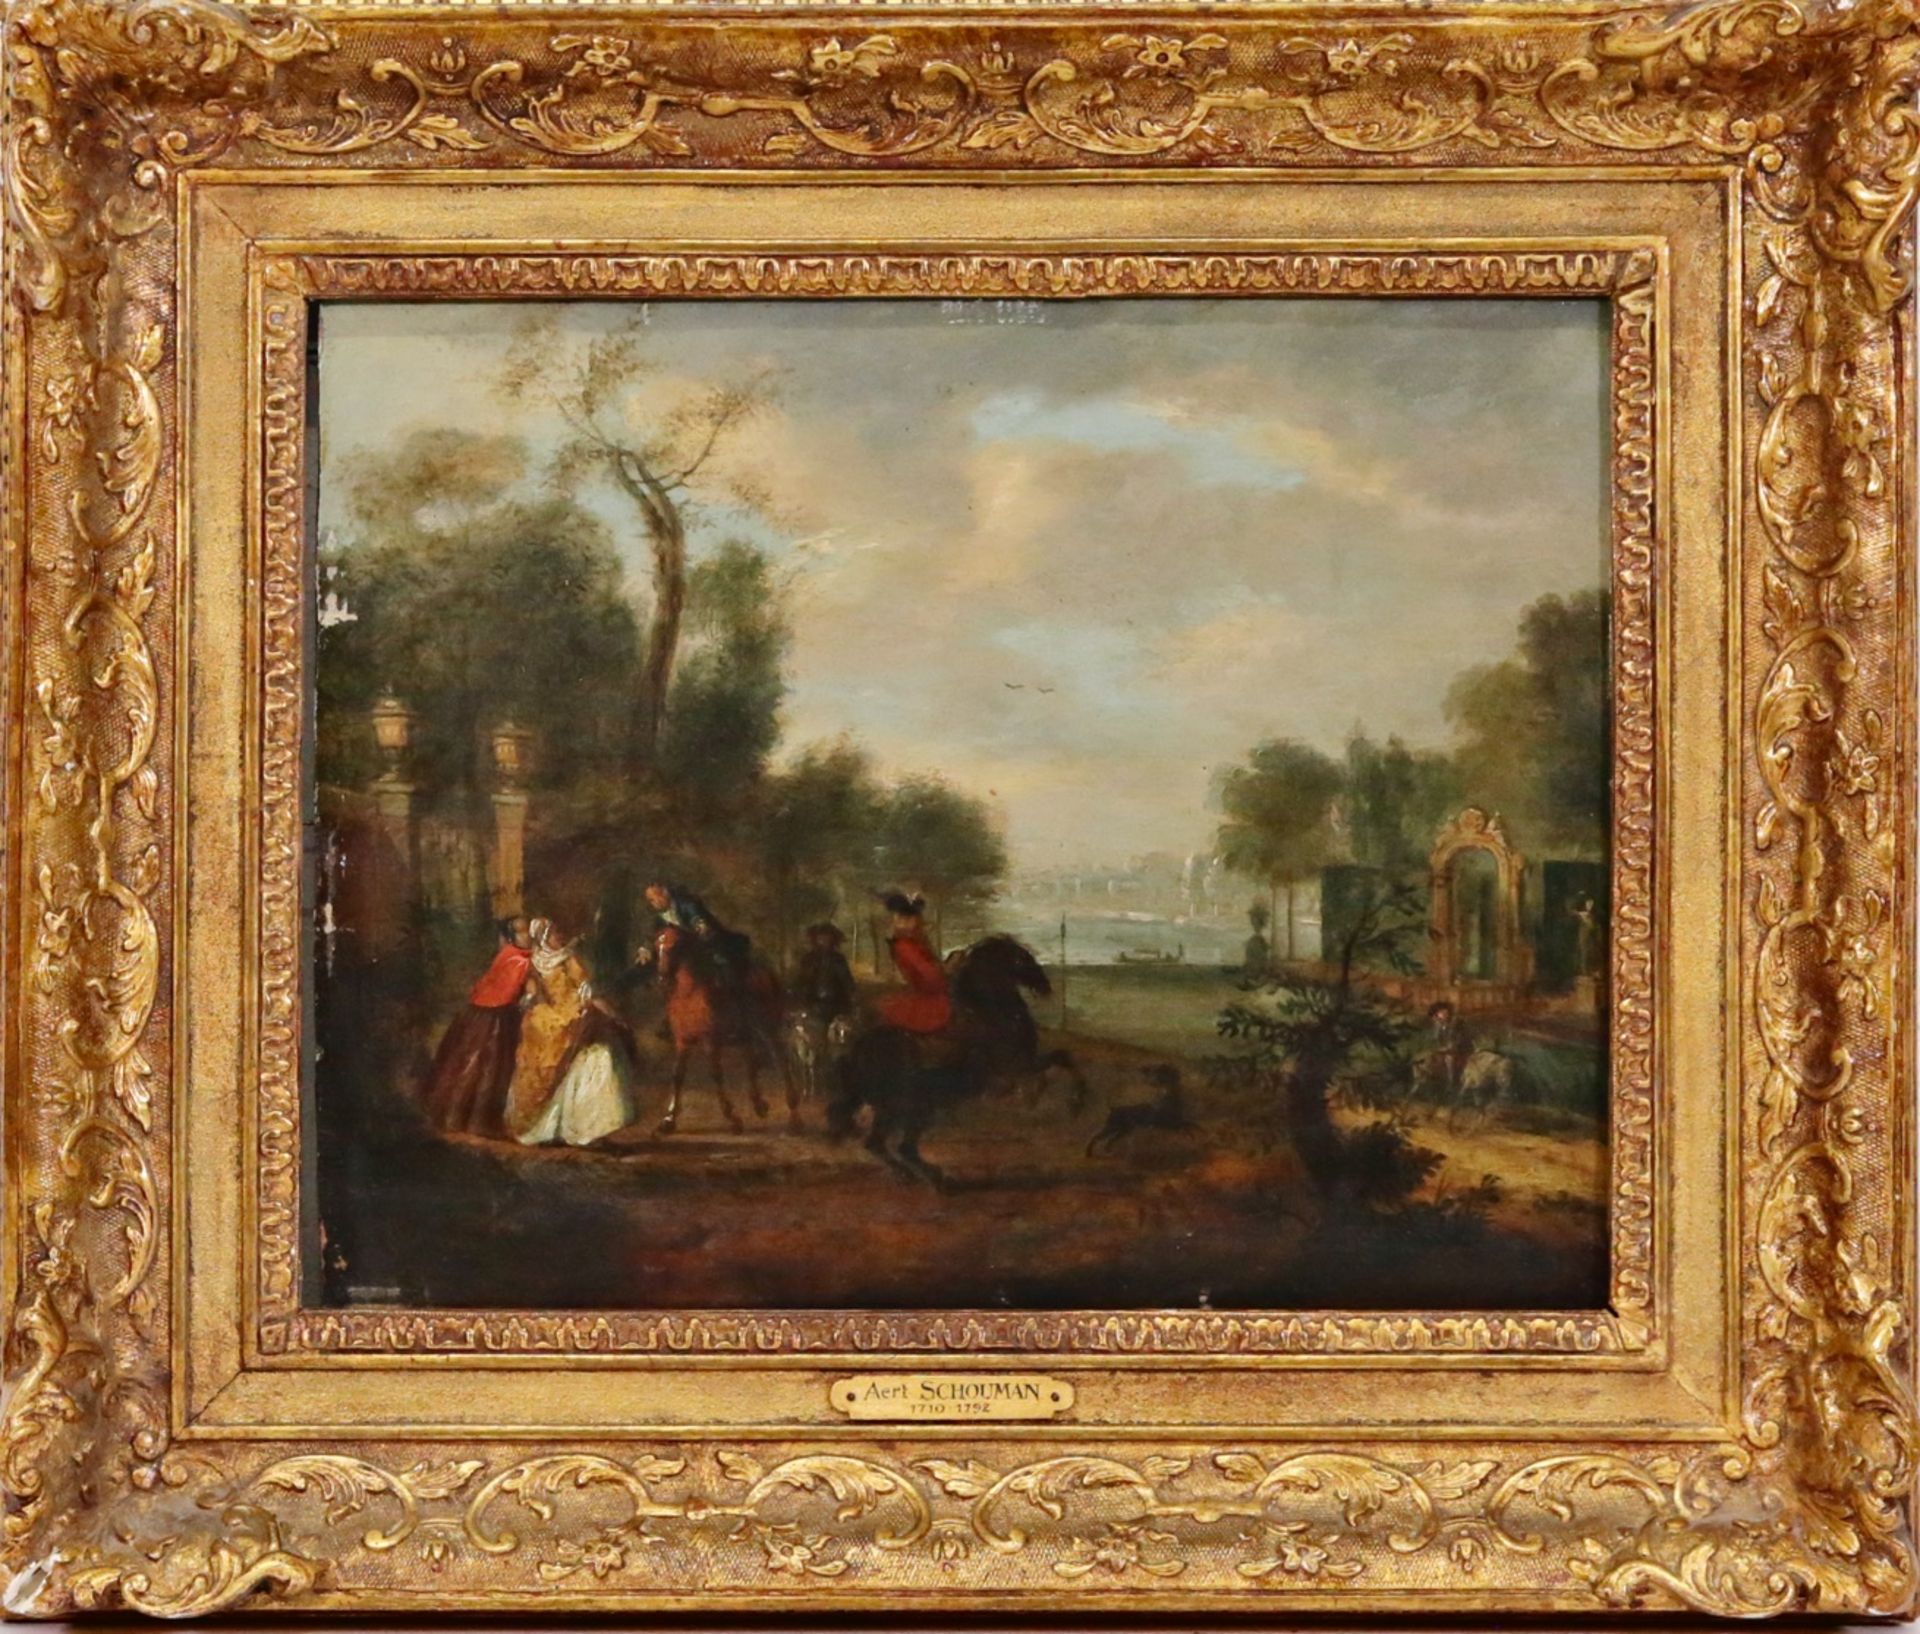 Aert SCHOUMAN (1710-1792) "The departure of the hunt", oil on panel, Dutch painting of the 18th _. - Image 2 of 4